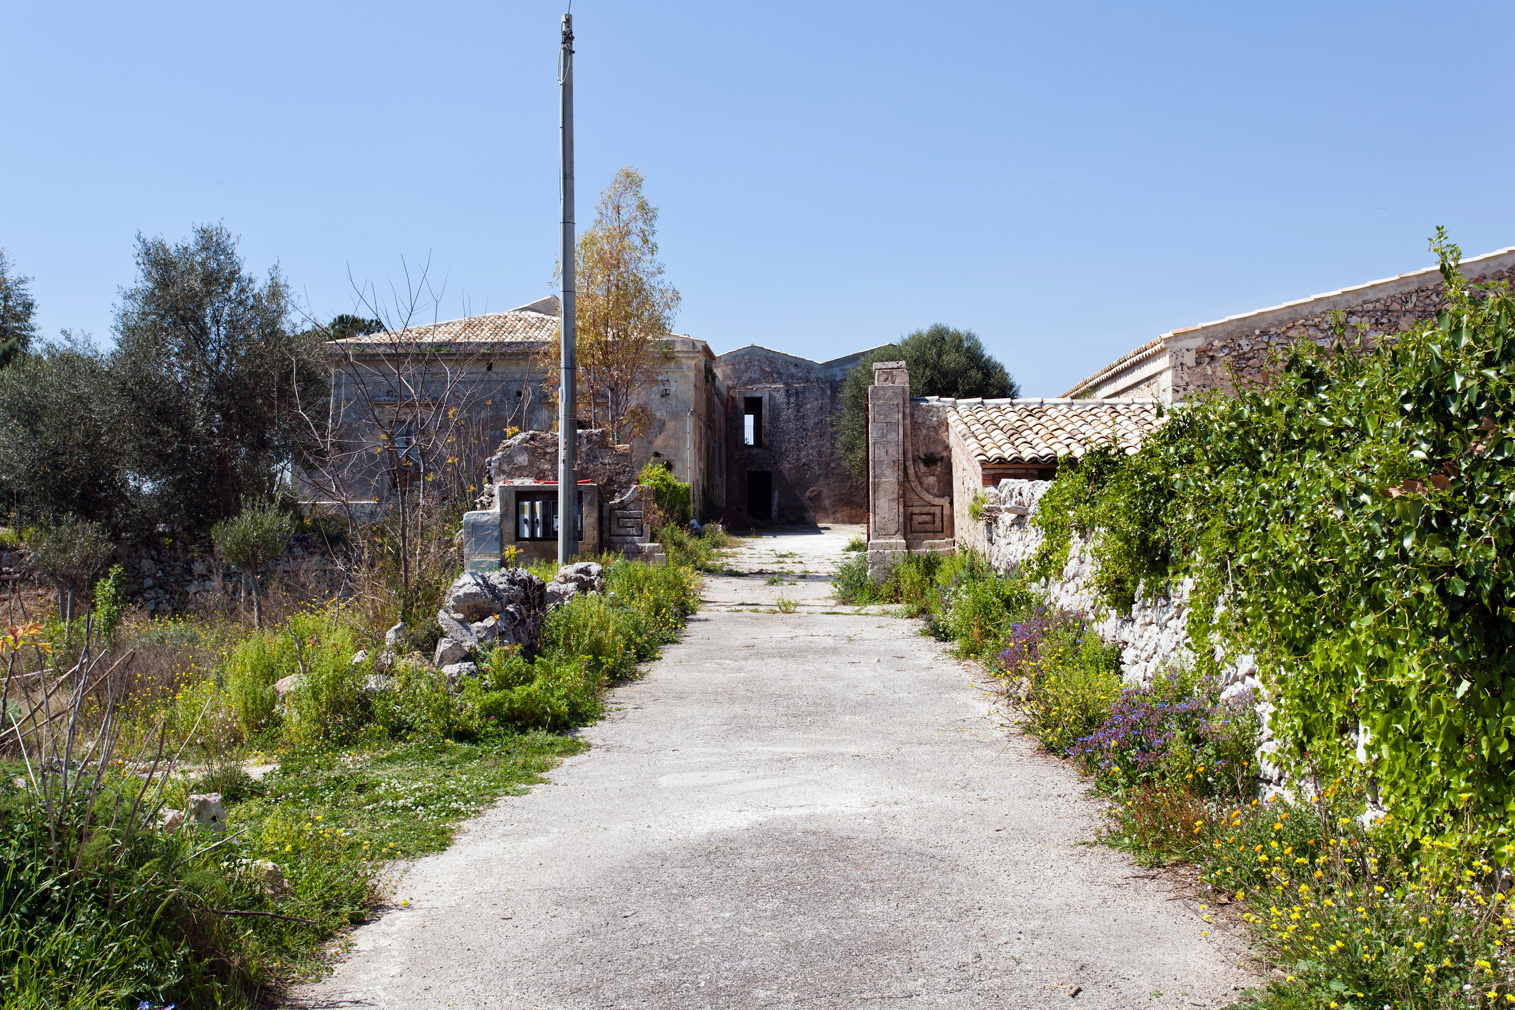 Gorgeous Sicilian estate in need of TLC lists for €850k